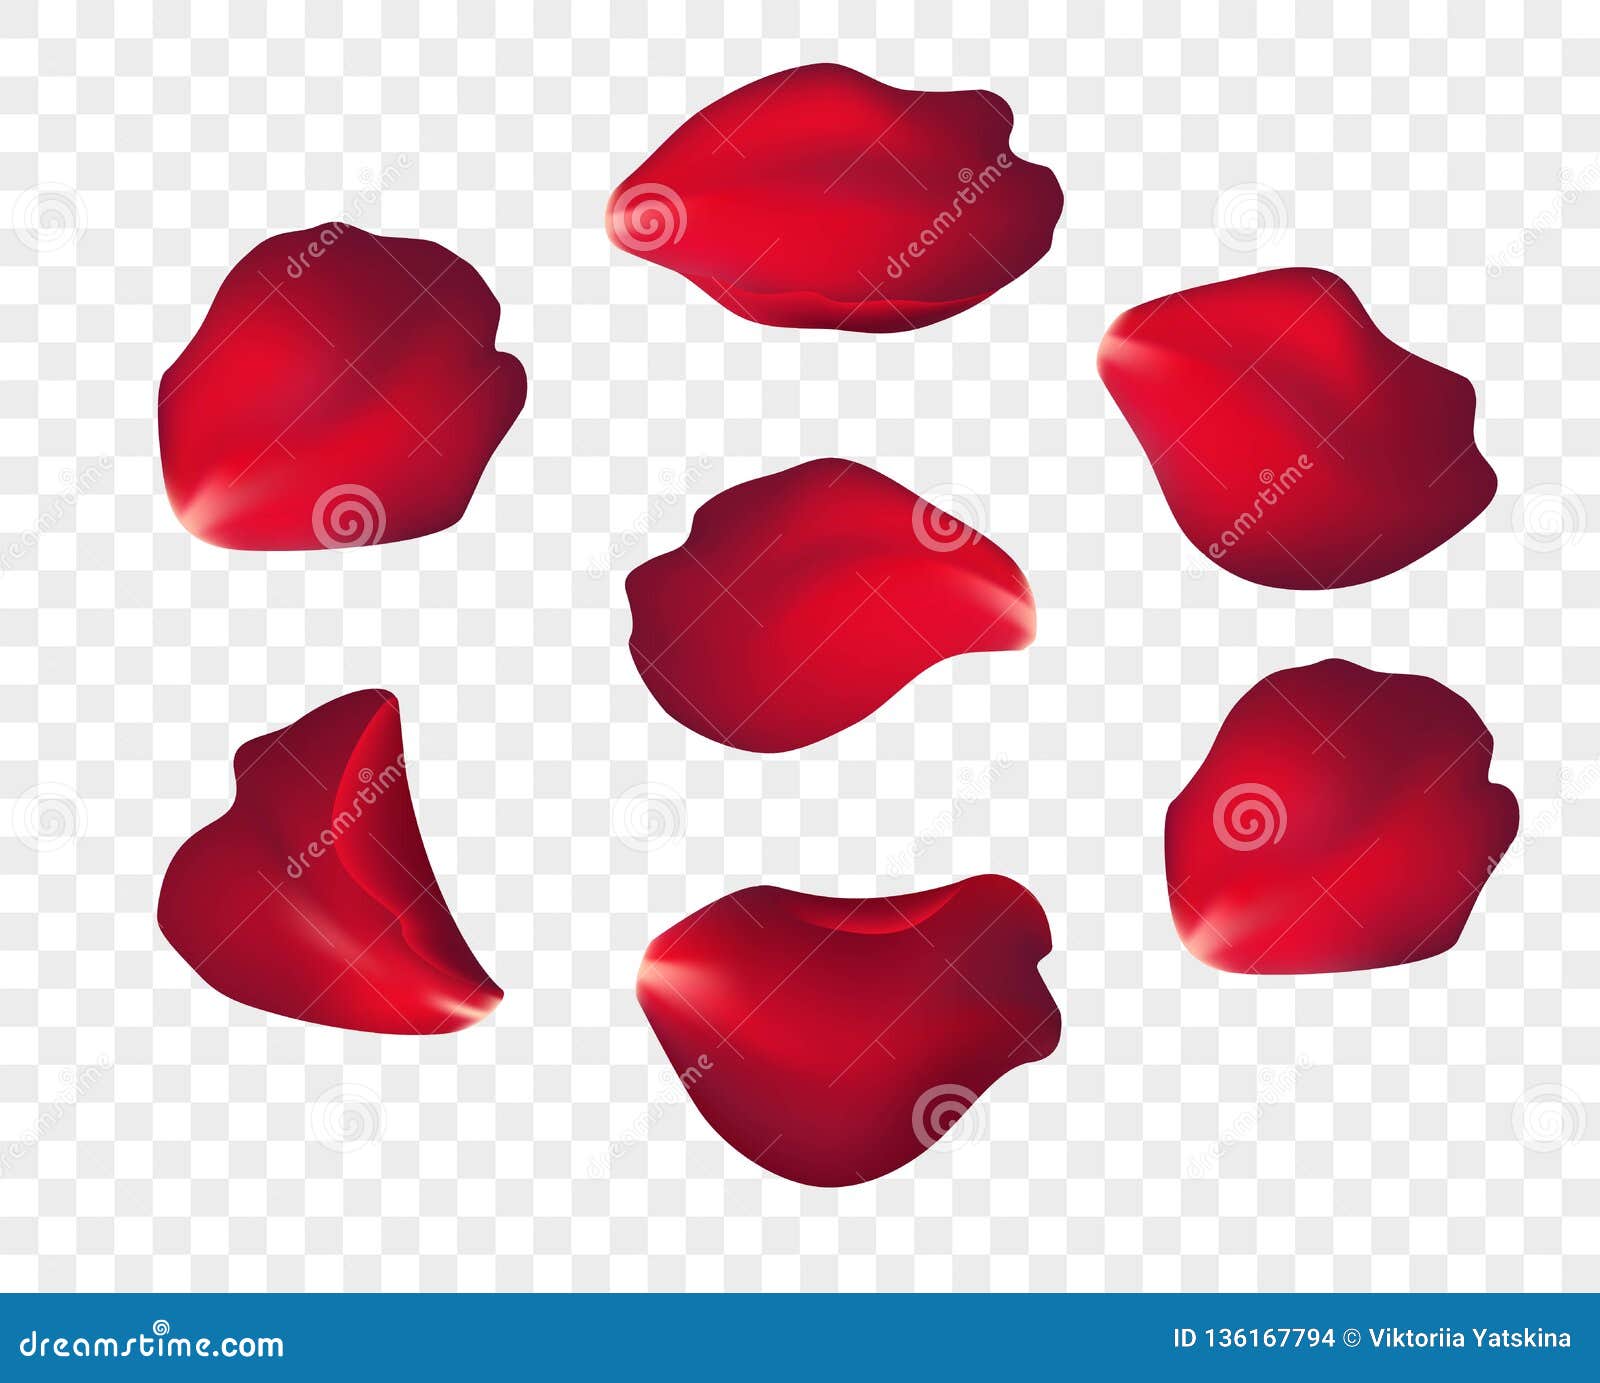 falling red rose petals  on white background.  